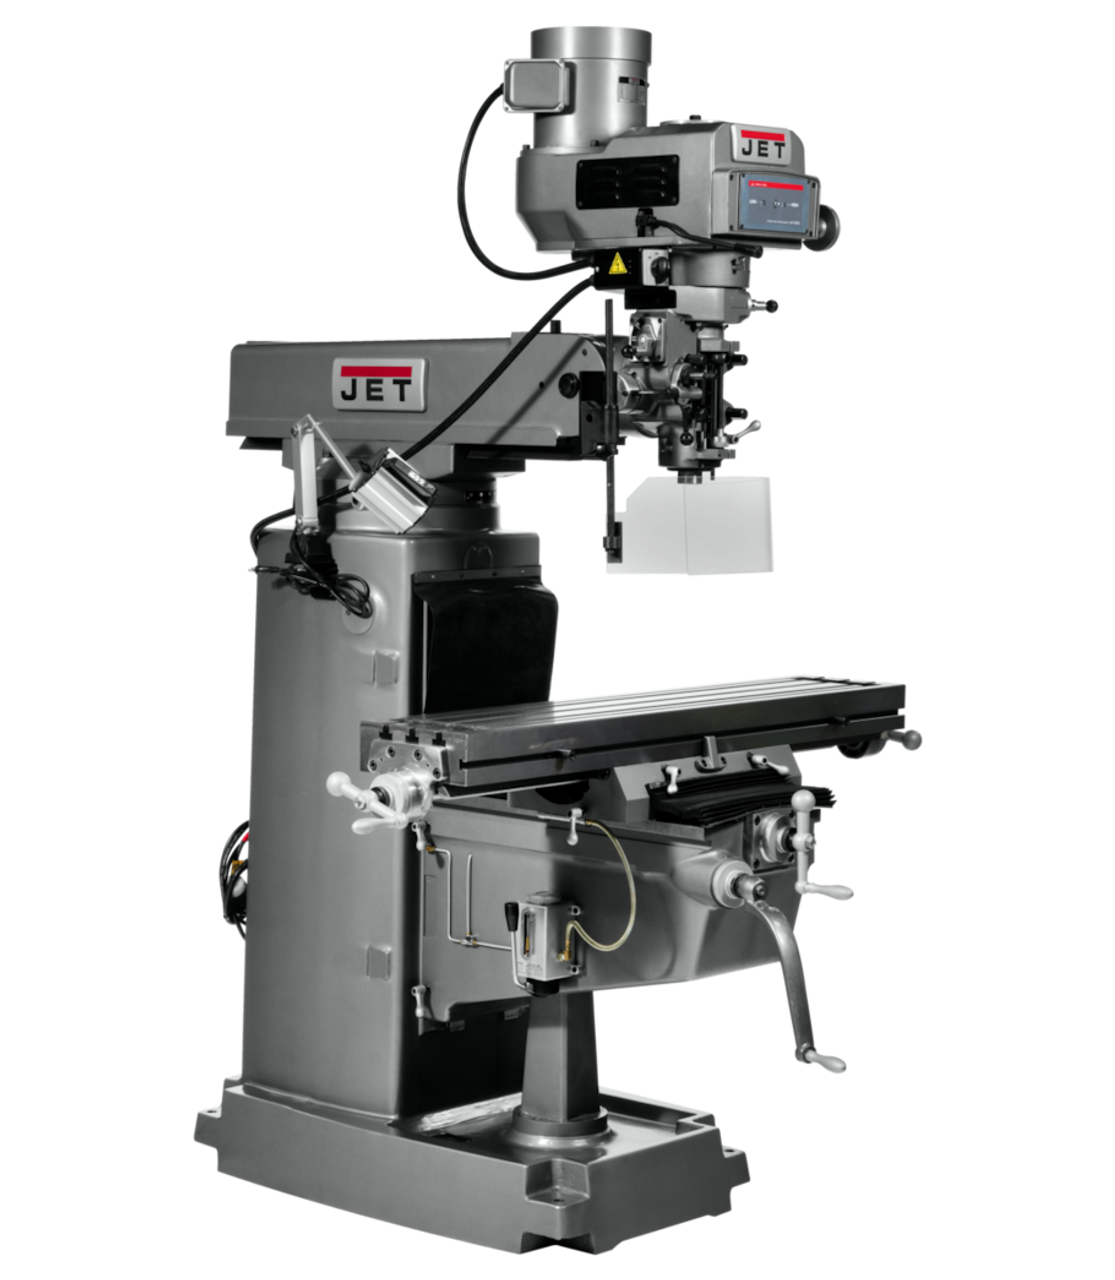 JET JTM-1050VS2 Mill with ACU-RITE 203 DRO with X-Axis Powerfeed 460V